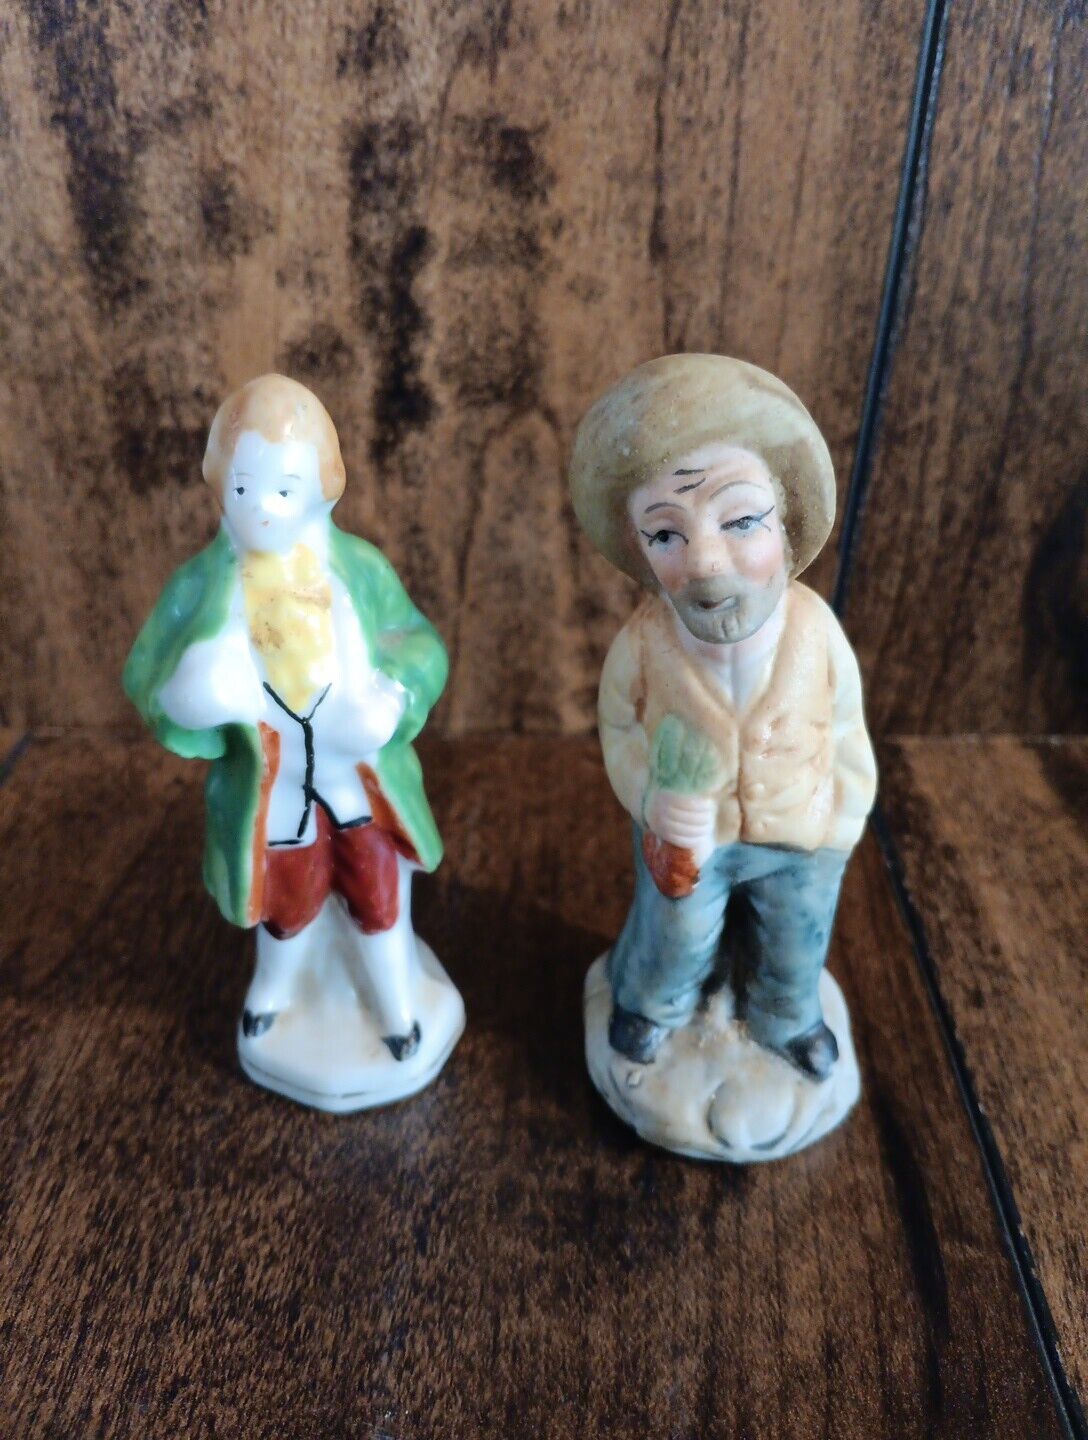 Vintage Made In Japan Mixed Match Of Little Figurines Of Men